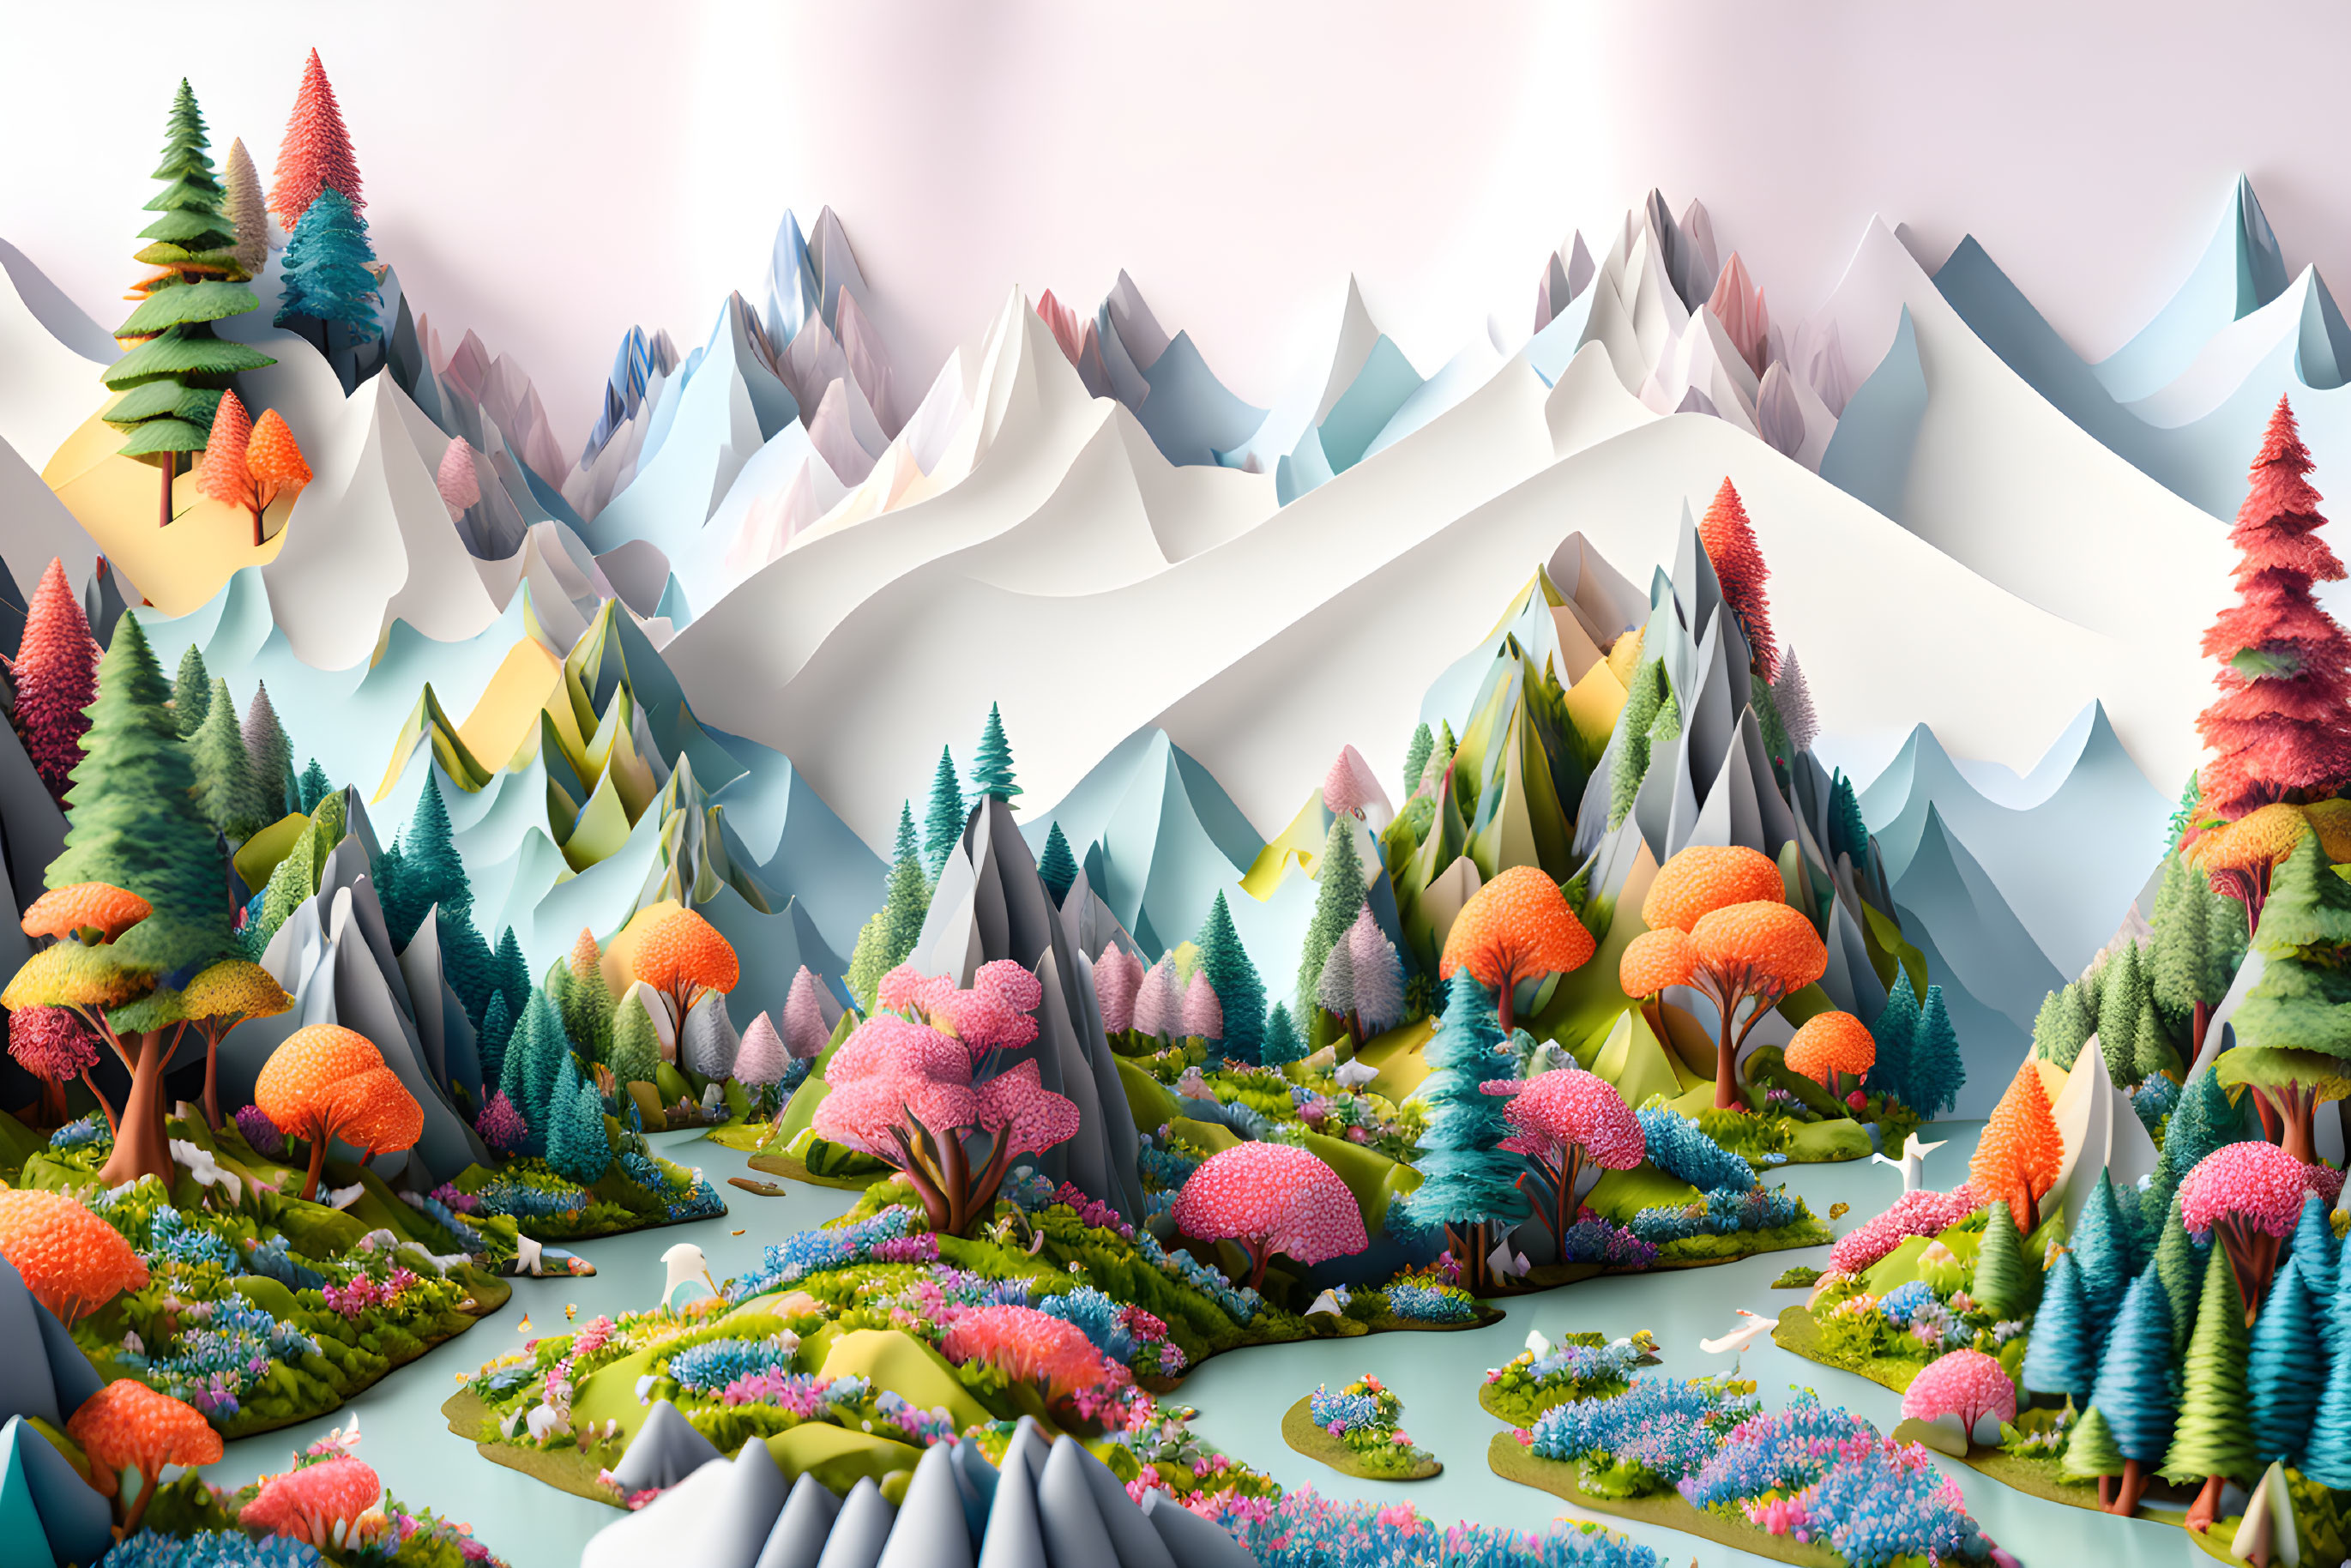 Colorful Geometric Landscape with Mountains